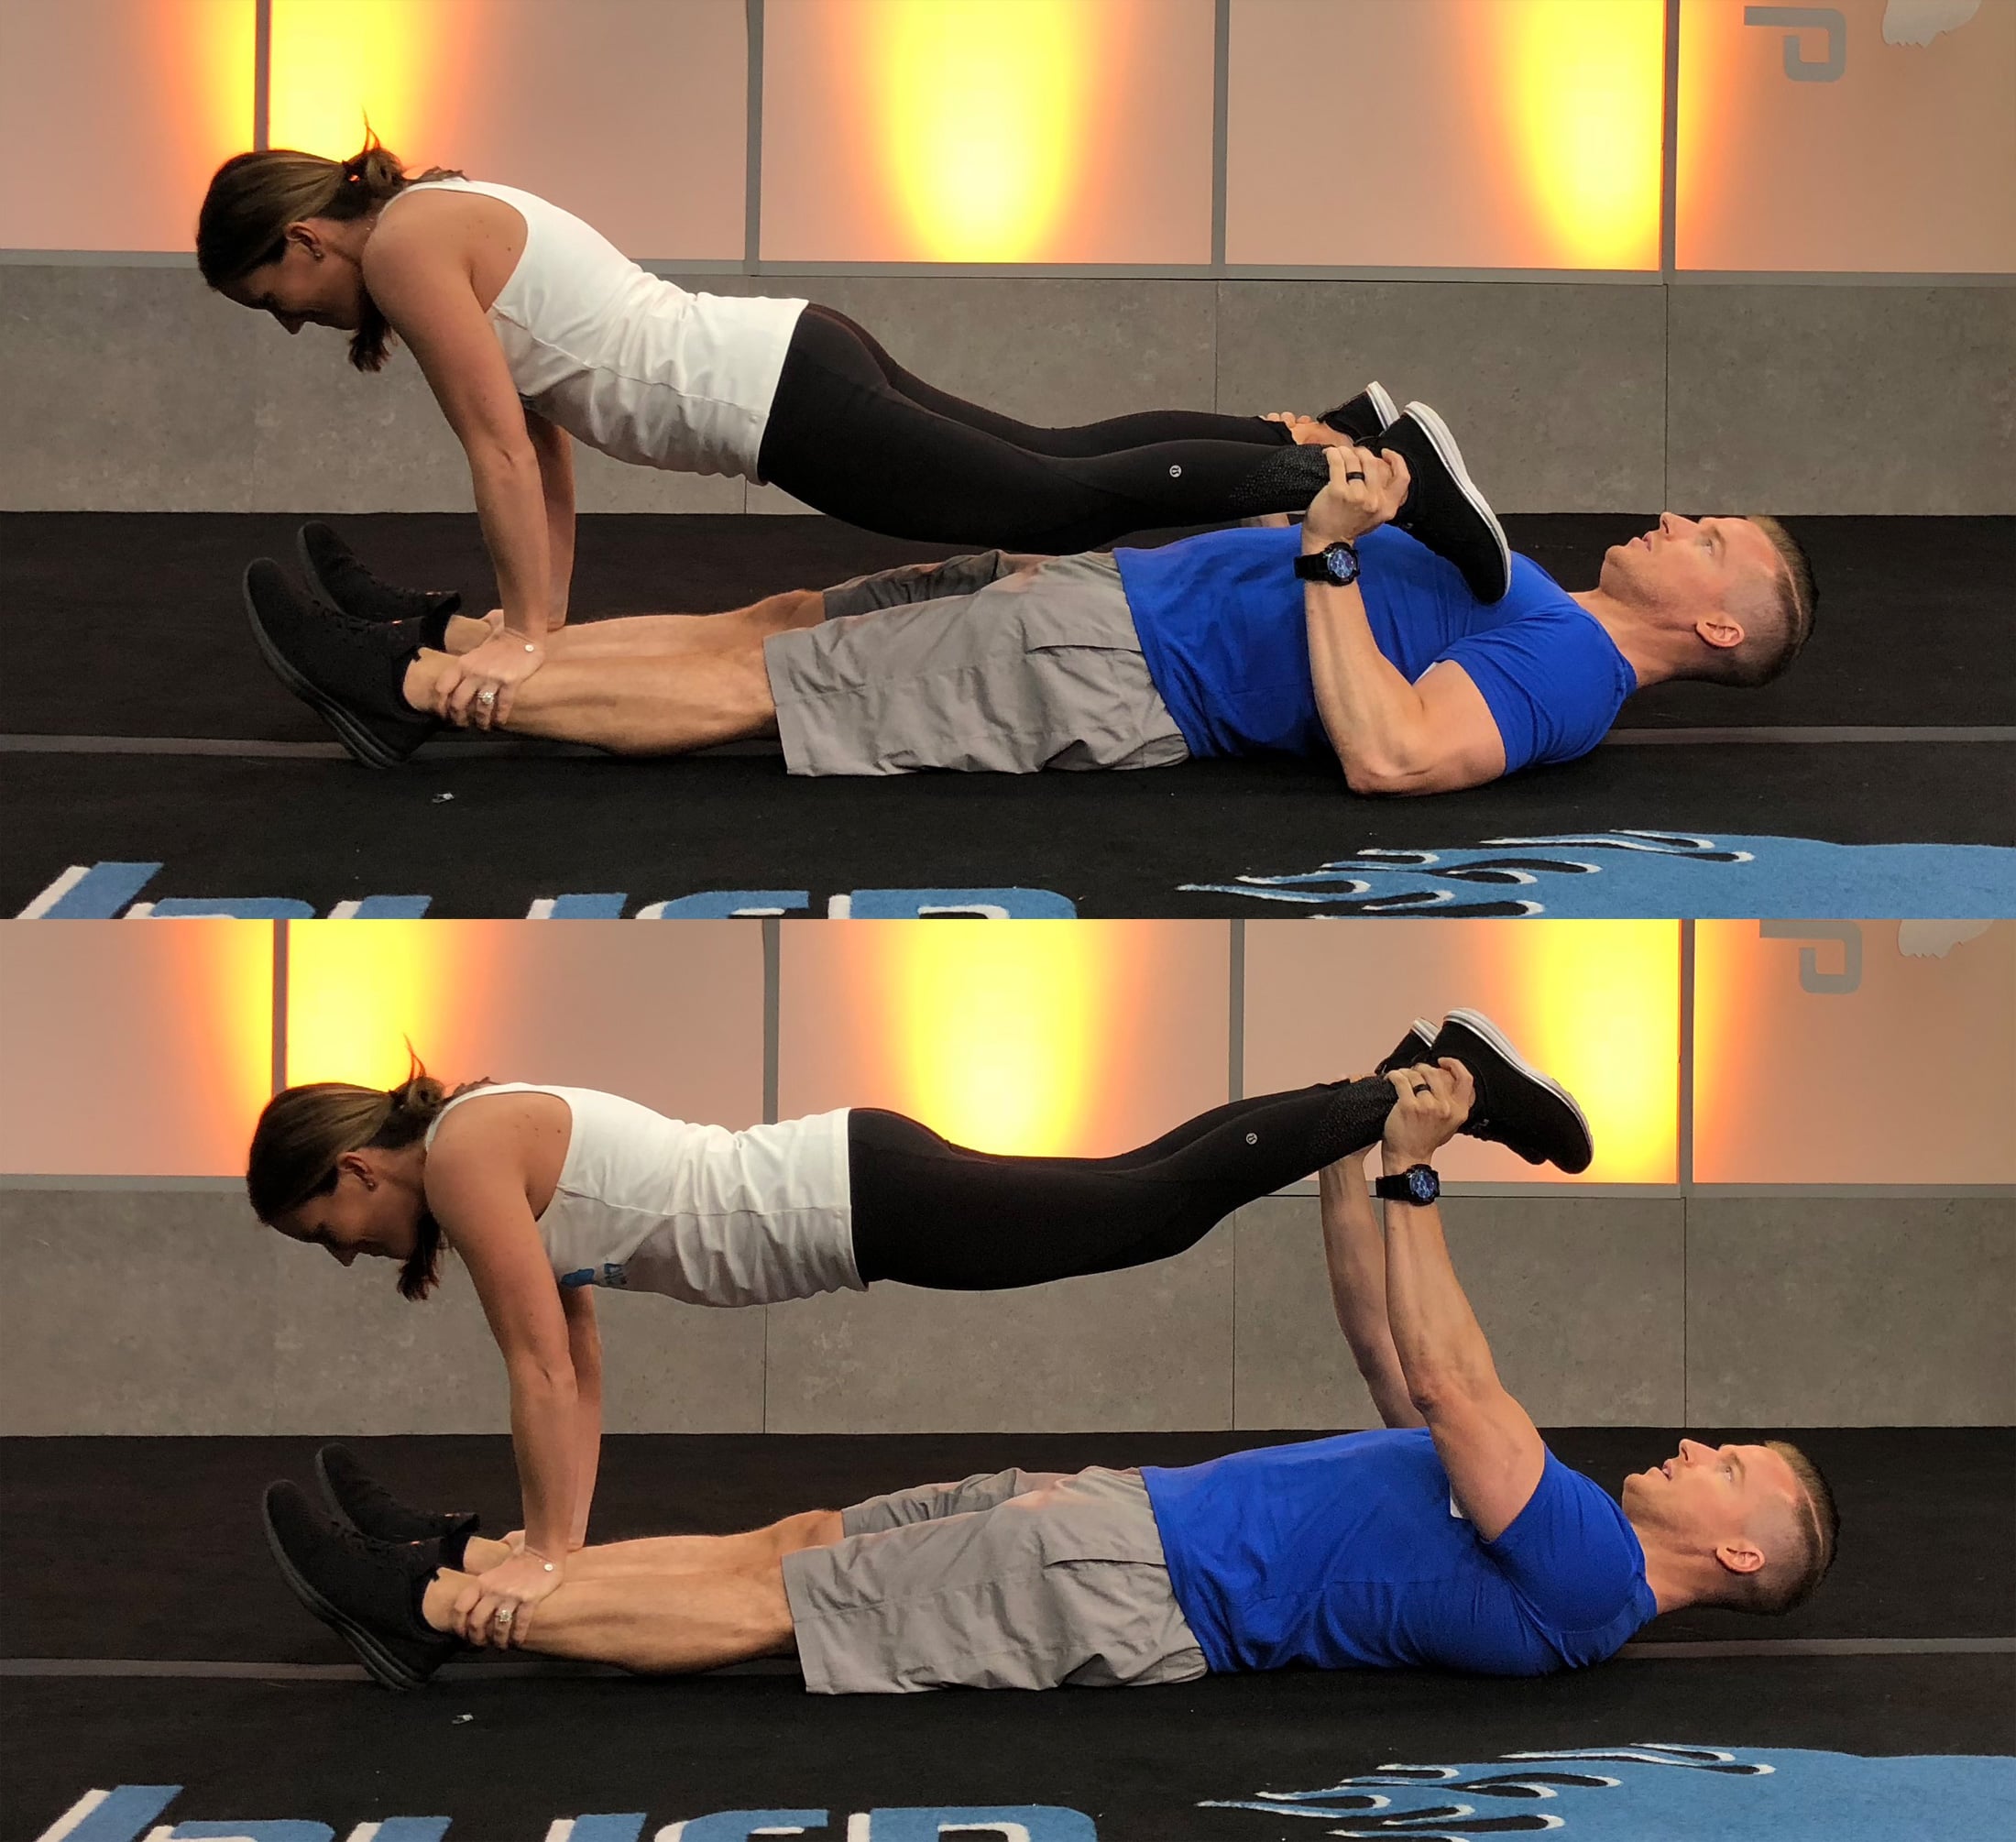 HIIT Things Up With This Couple's Workout